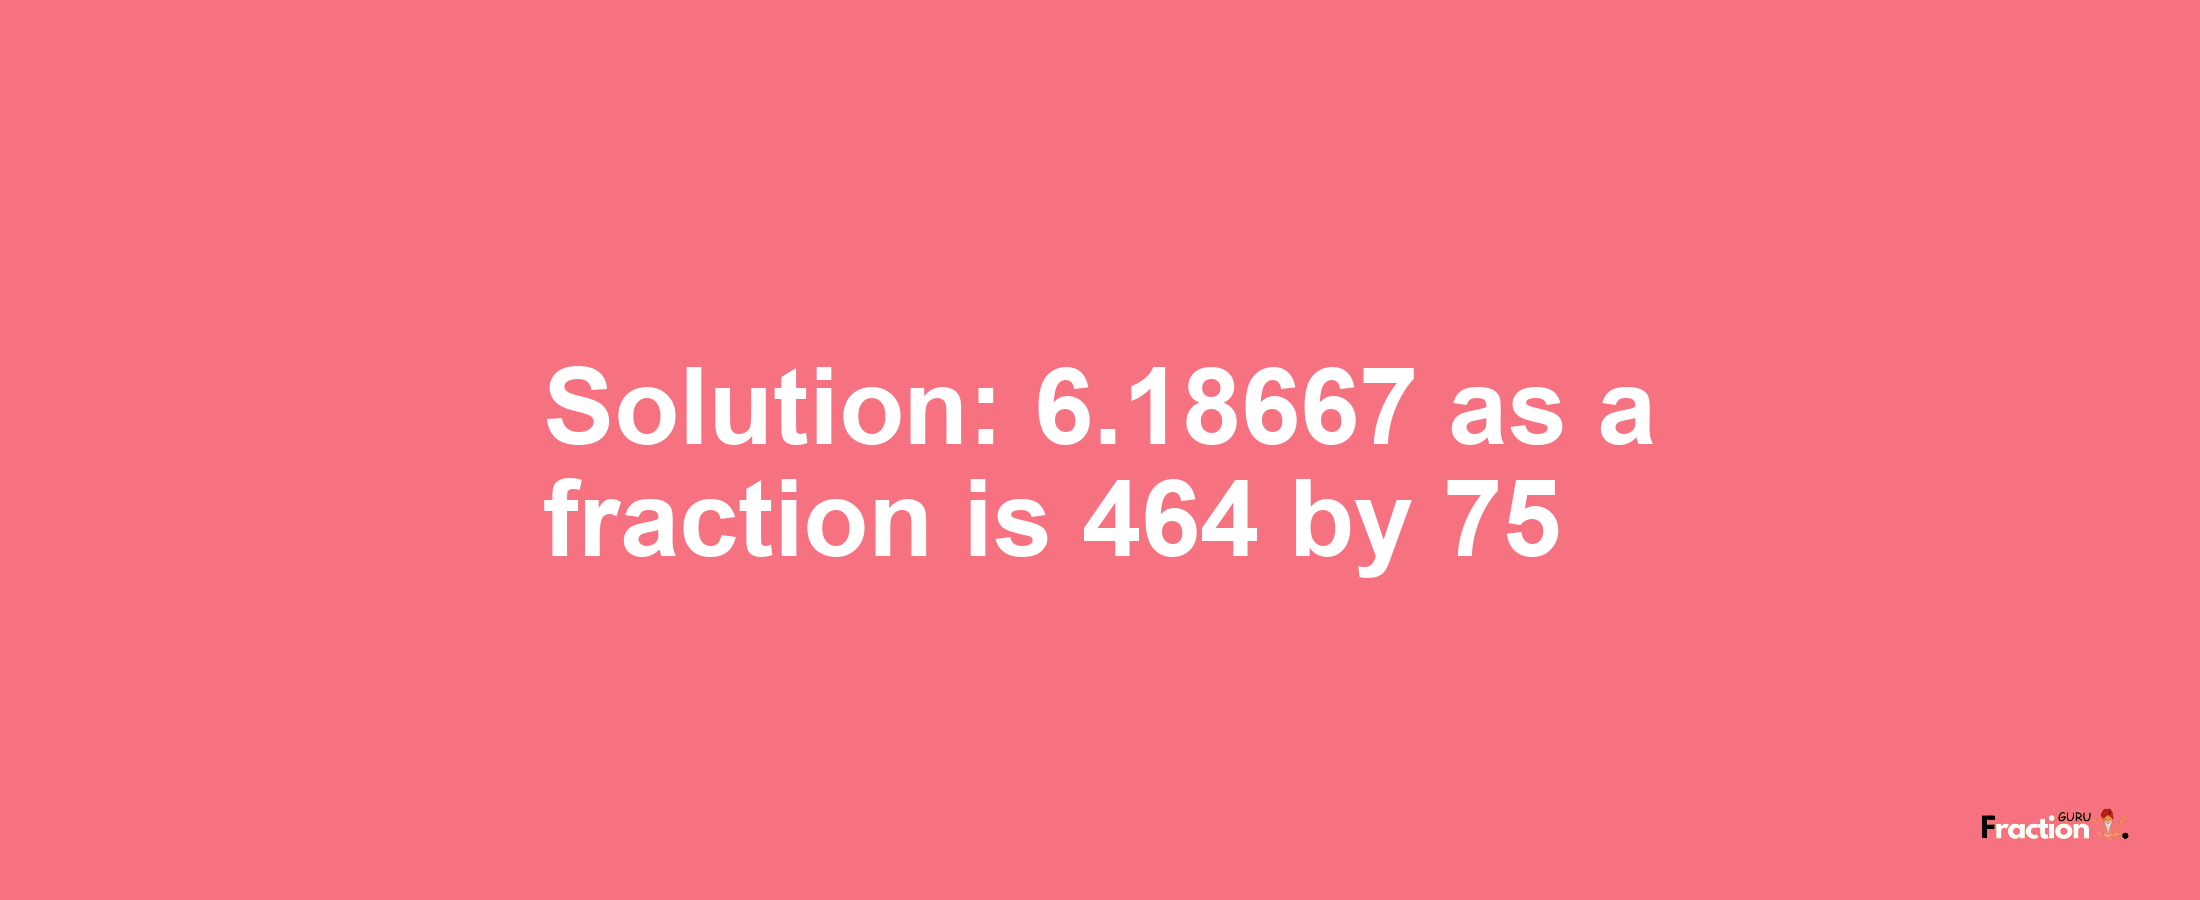 Solution:6.18667 as a fraction is 464/75